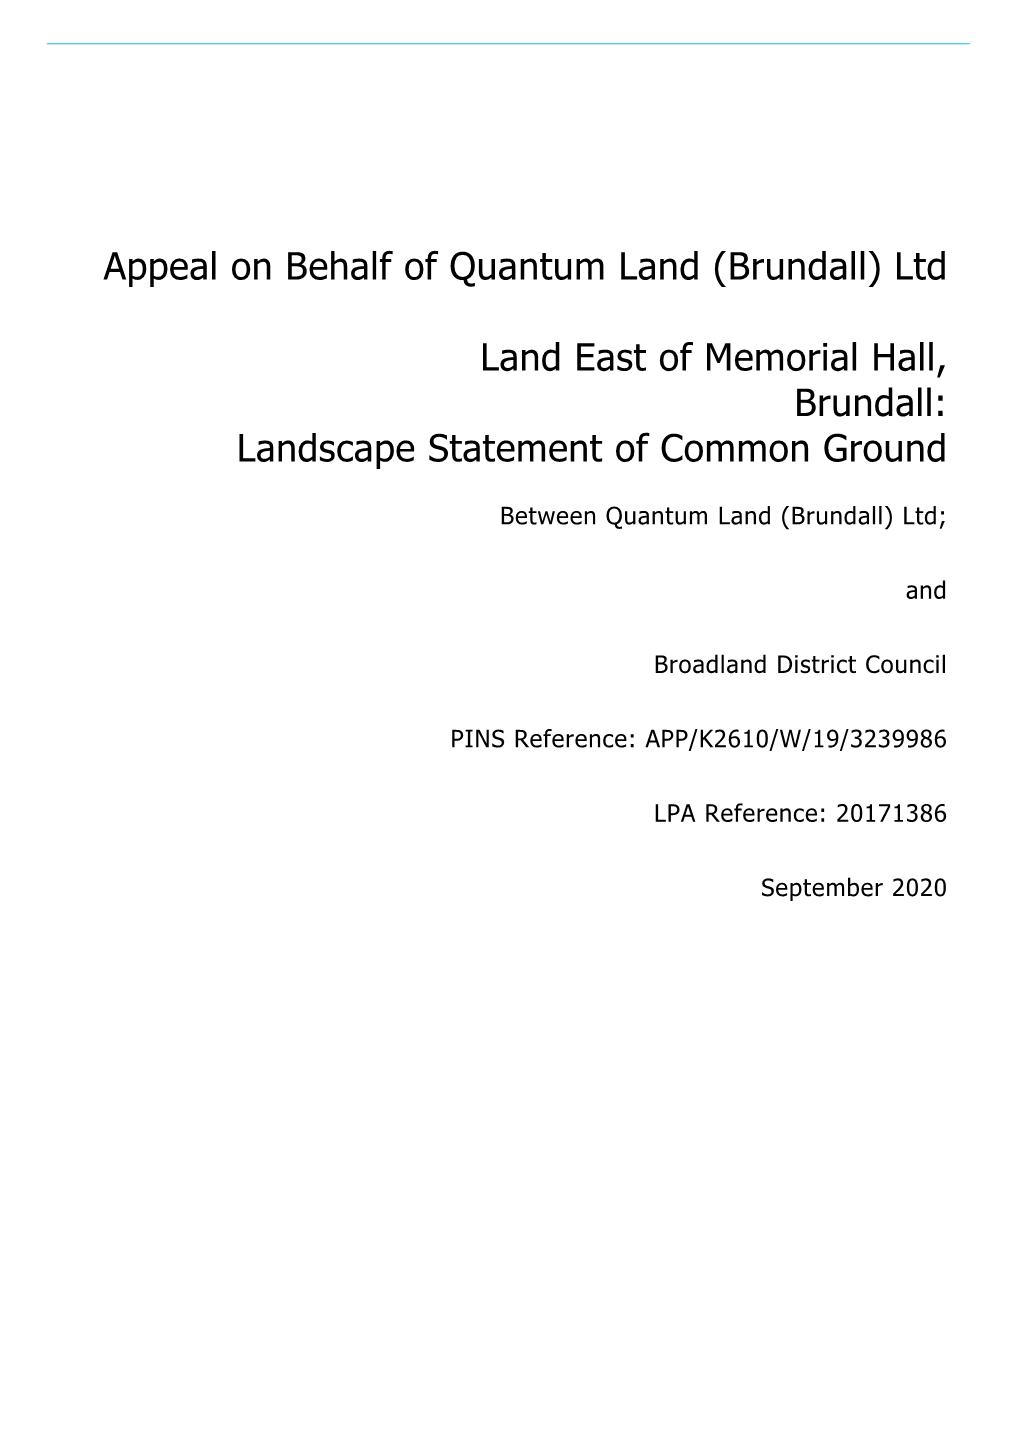 Land East of Memorial Hall, Brundall: Landscape Statement of Common Ground